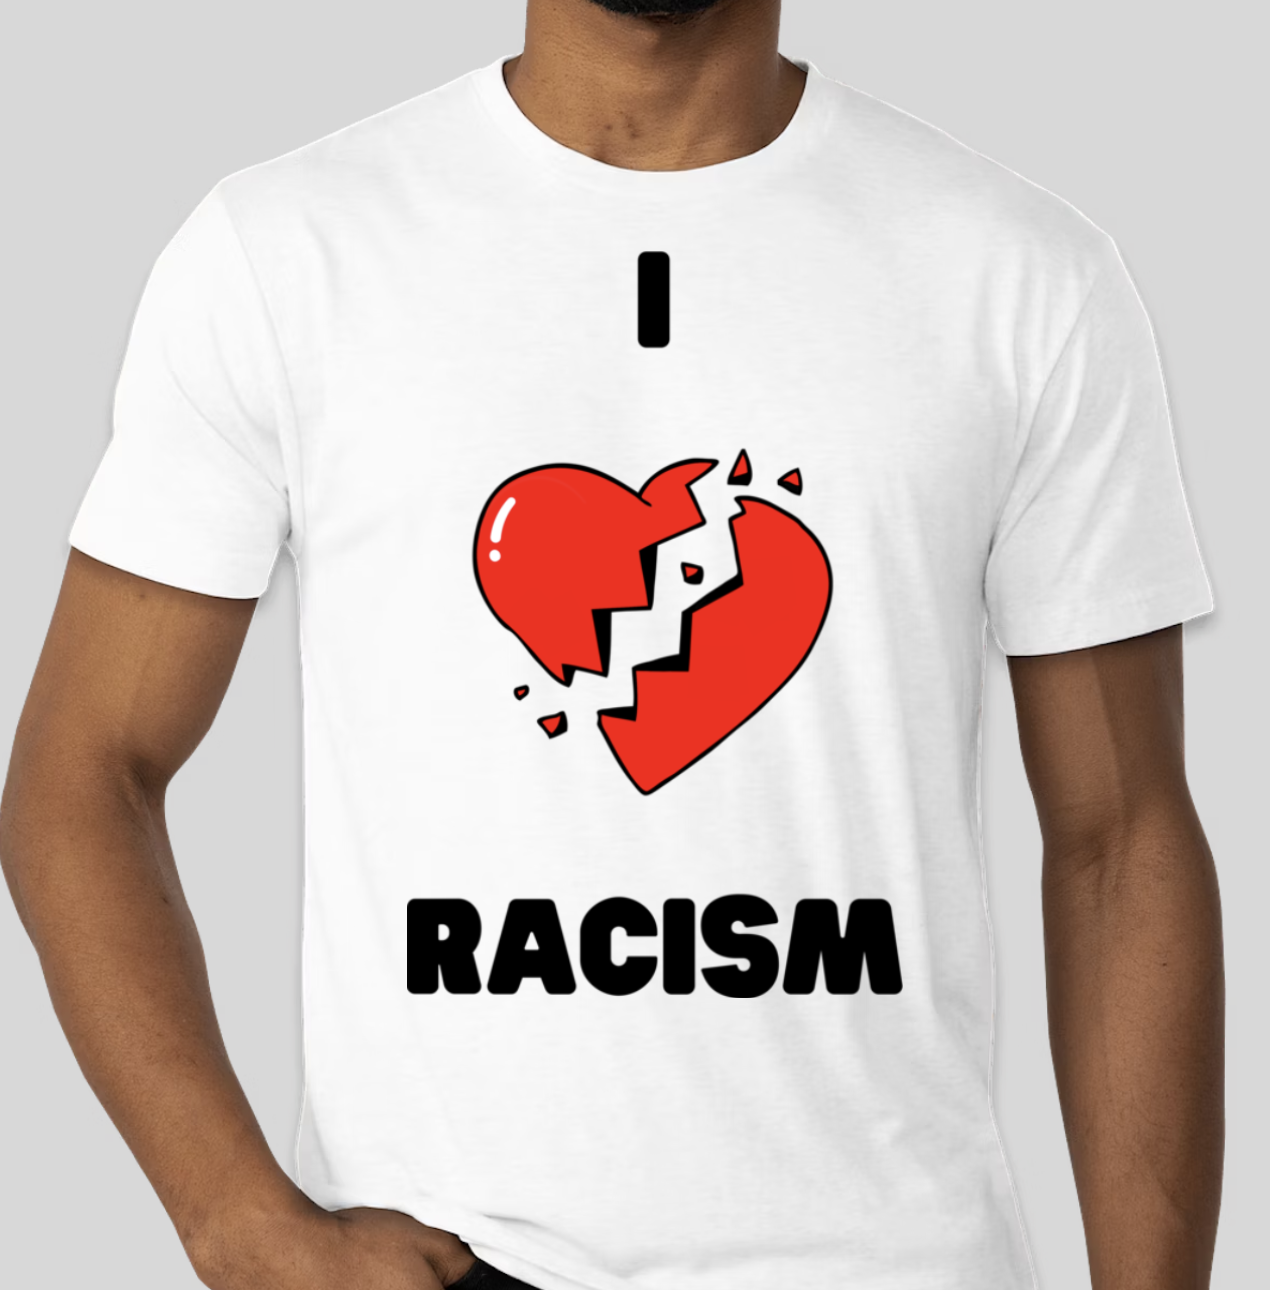 The I Hate Racism t-shirt is a remake of the first ever Broken Heart Shirt. The shirt features the famous BHS heart and text. The classic BHS logo has been applied to the back of the t-shirt.